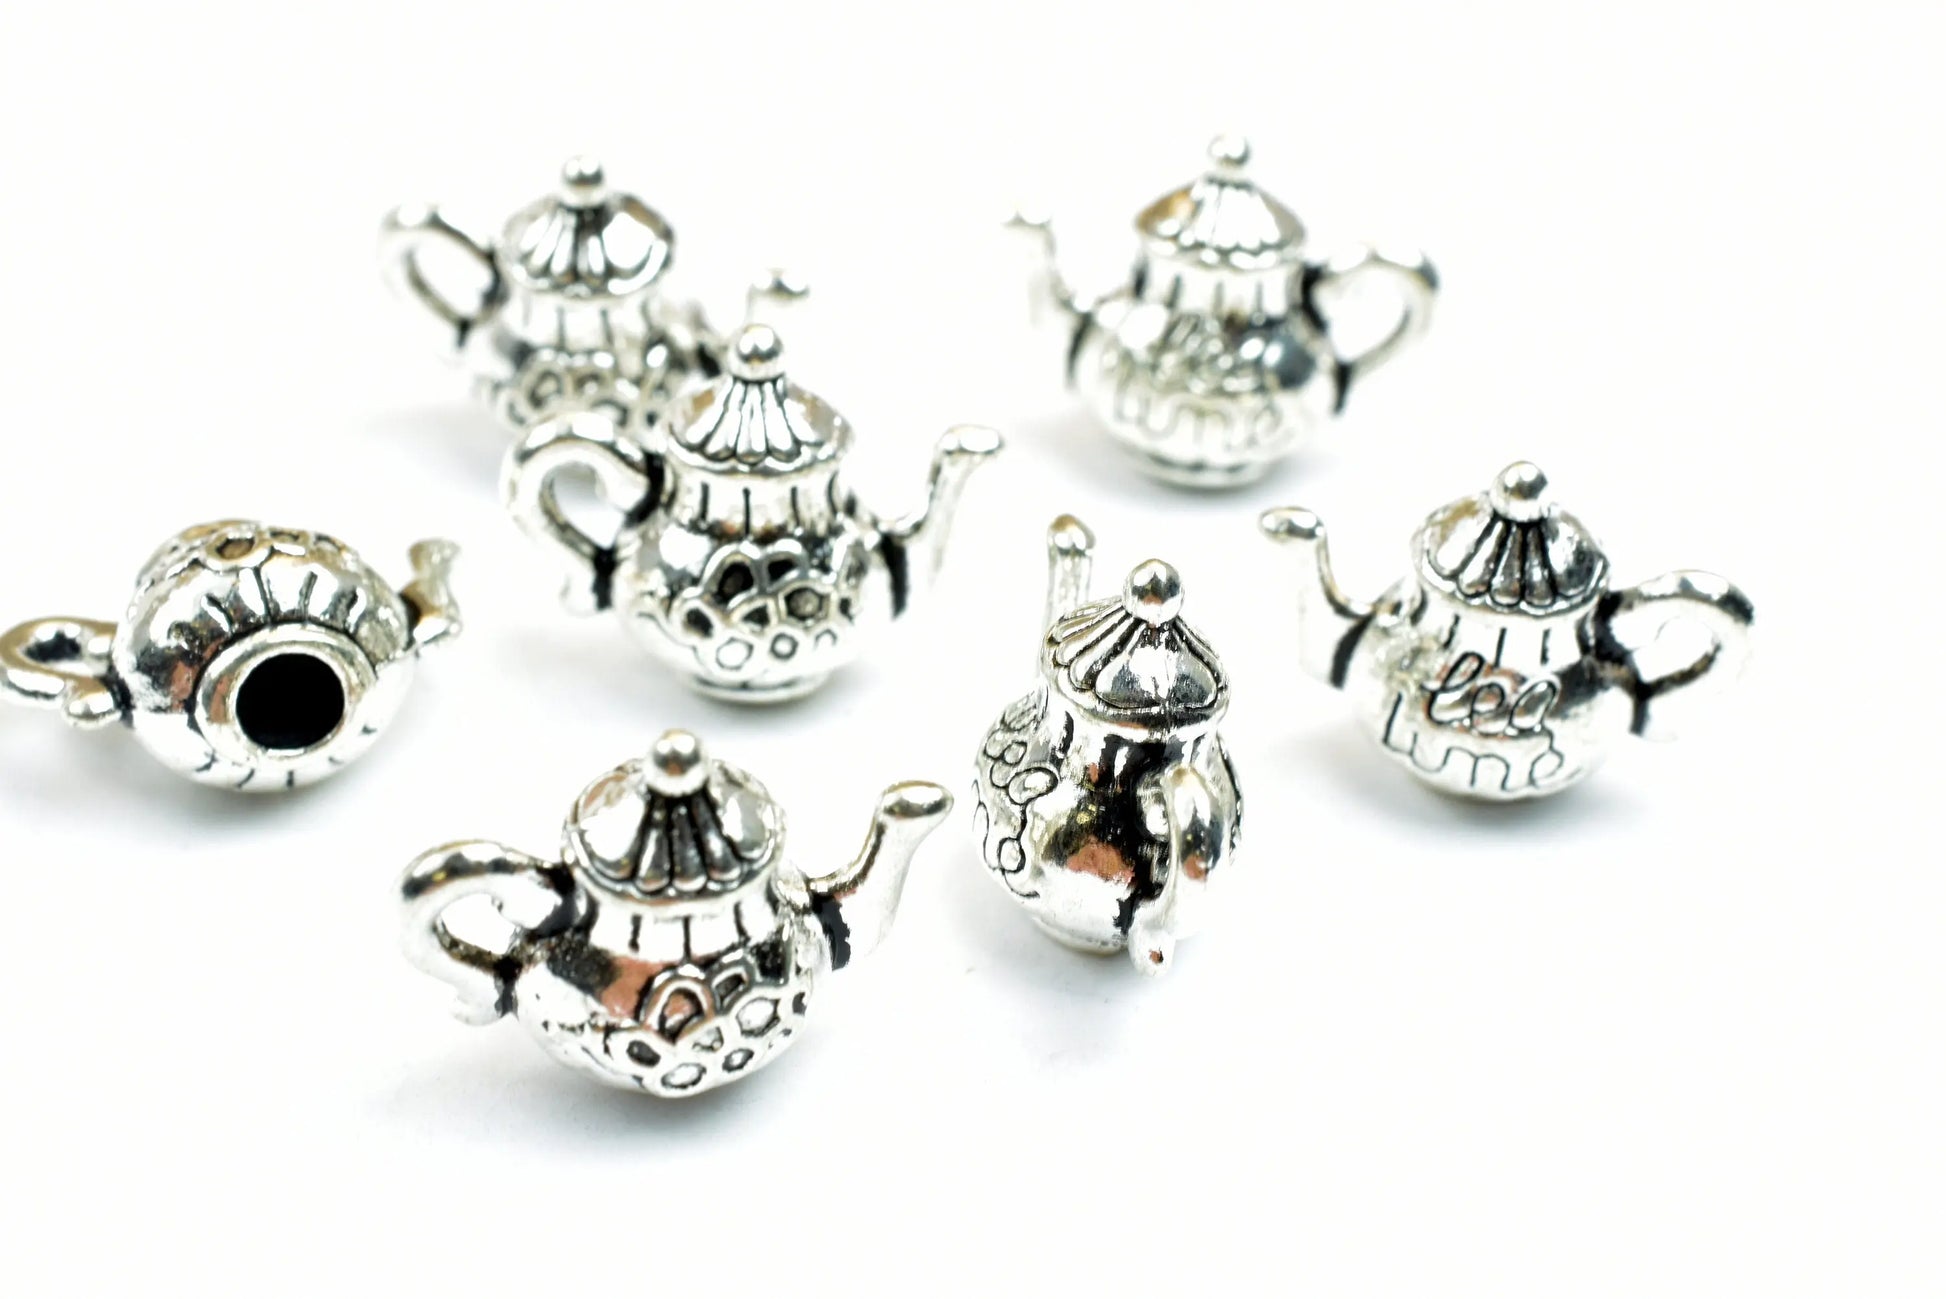 Kettle Charm Size 13x16mm Silver Color Kitchen 3D Charm Pendant Finding For Jewelry Making 7PCs/PK - BeadsFindingDepot